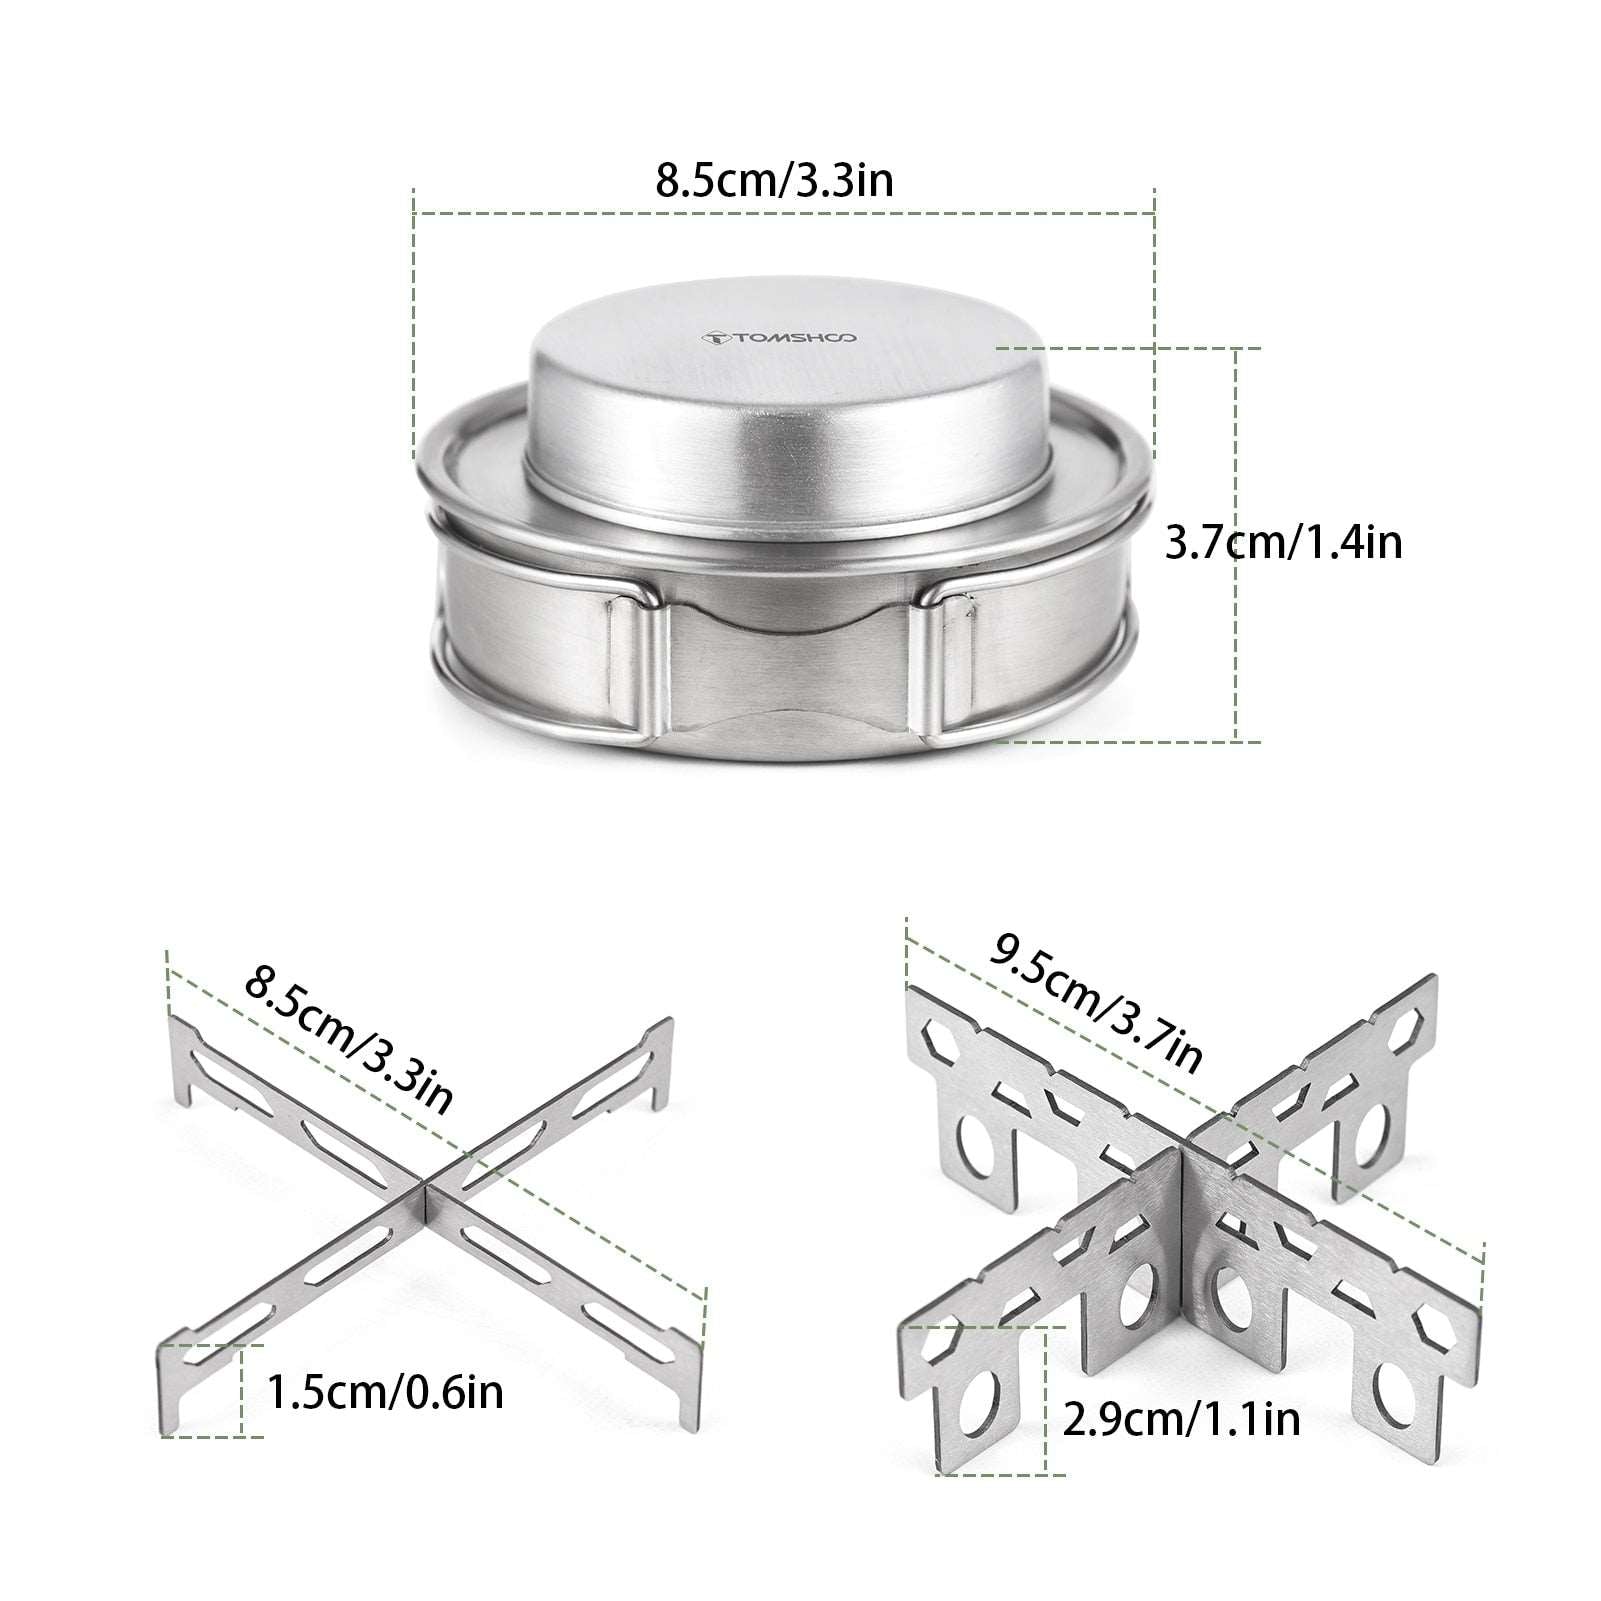 Portable Stainless Steel Alcohol Stove